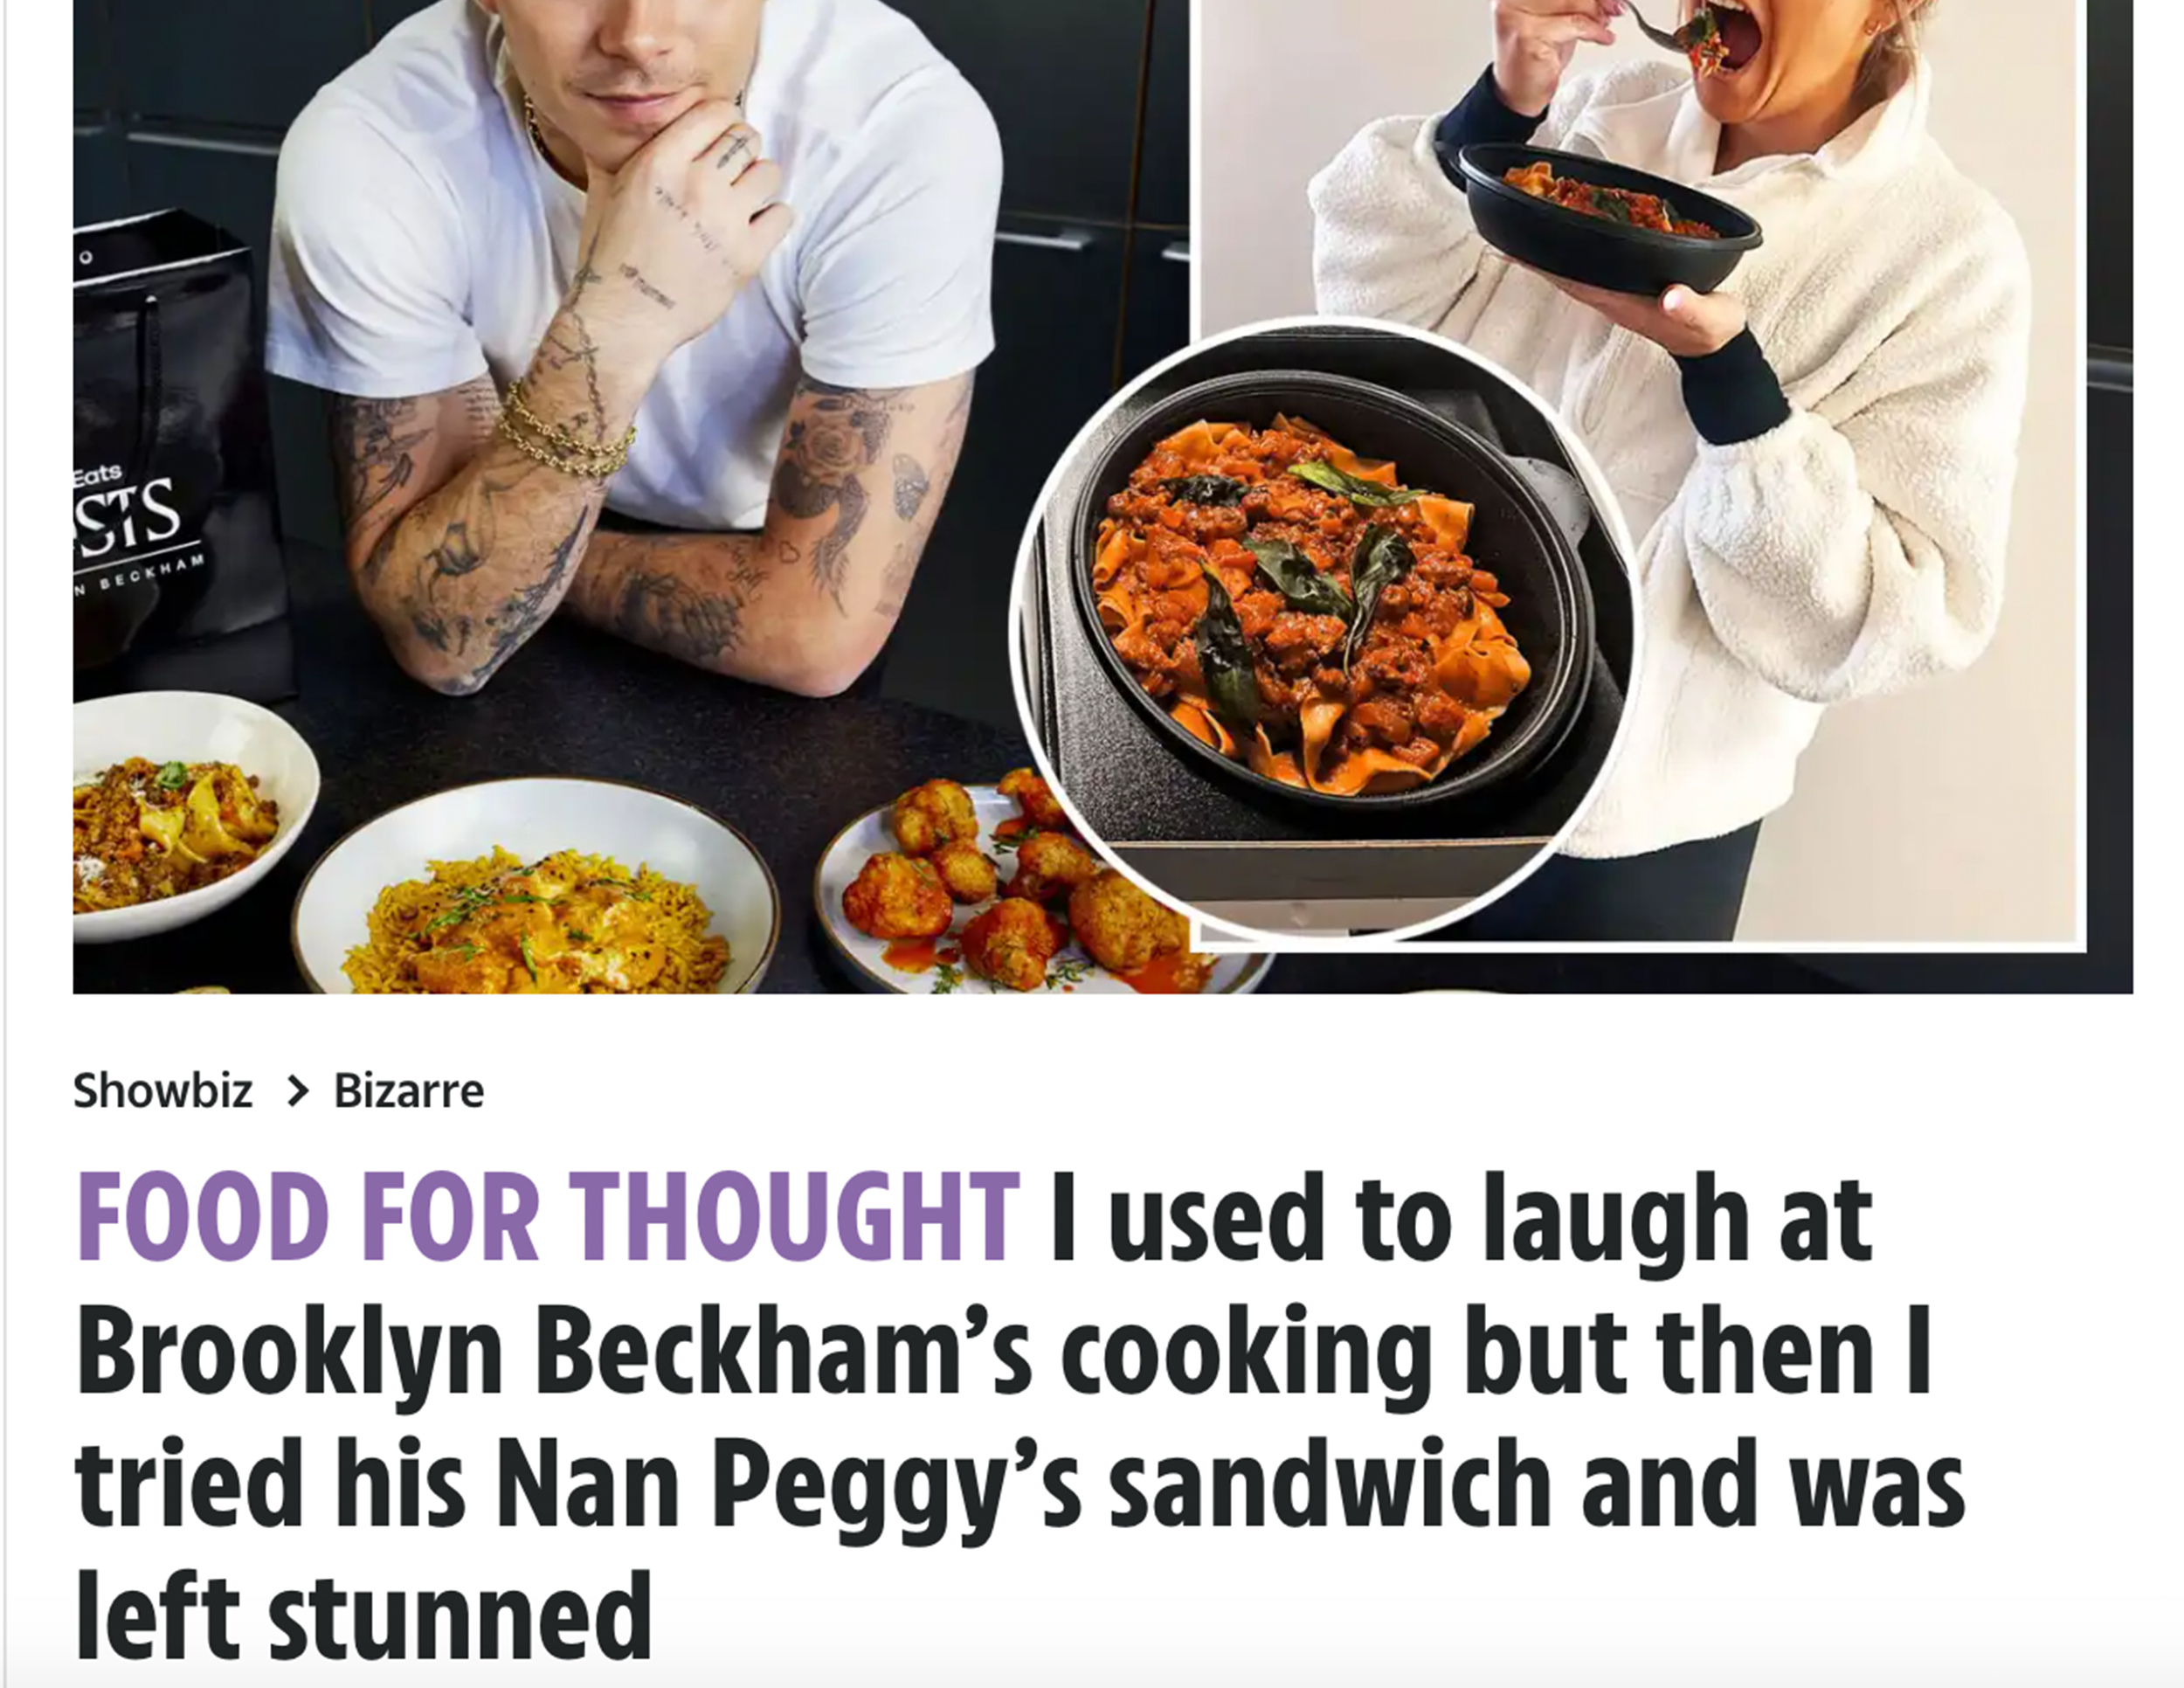 A screenshot of the headline and photo used in the Brooklyn Beckham food review on the Sun online.